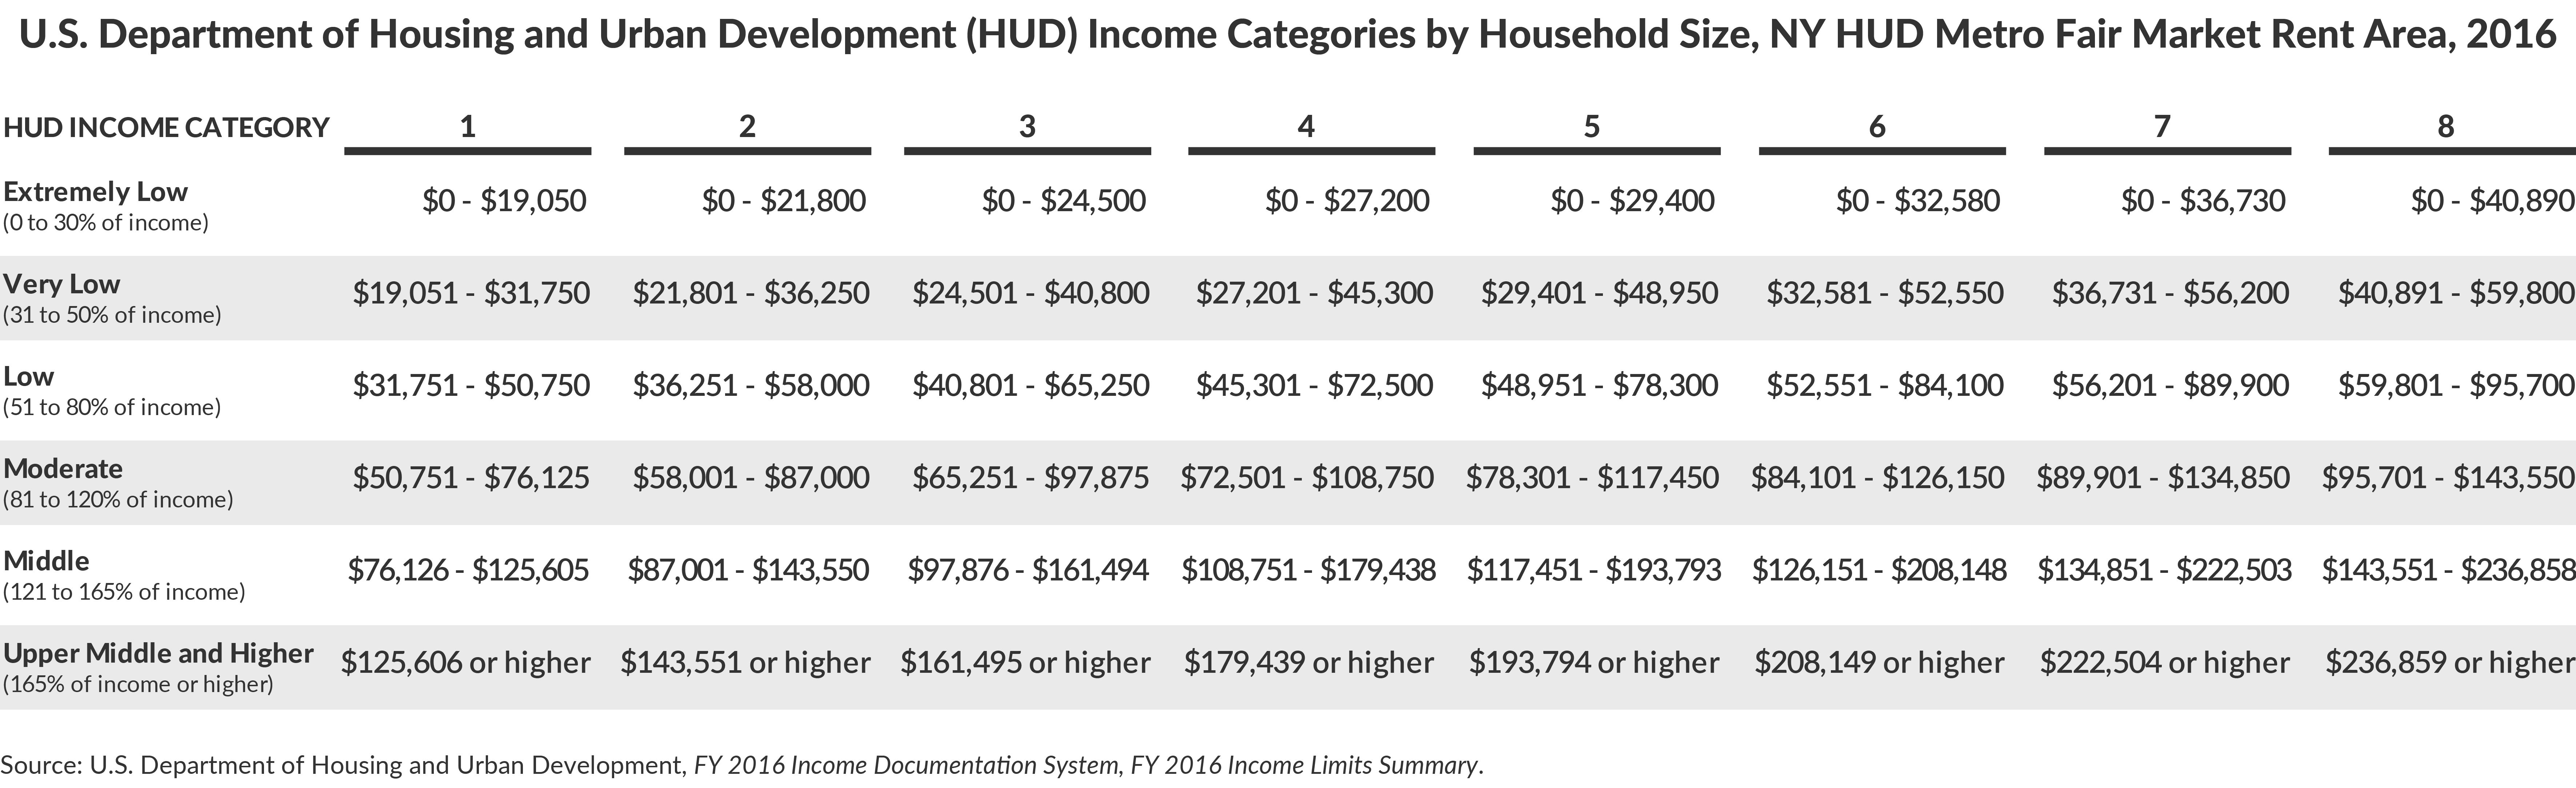 U.S. Department of Housing and Urban Development (HUD) Income Categories by Household Size, NY HUD Metro Fair Market Rent Area, 2016